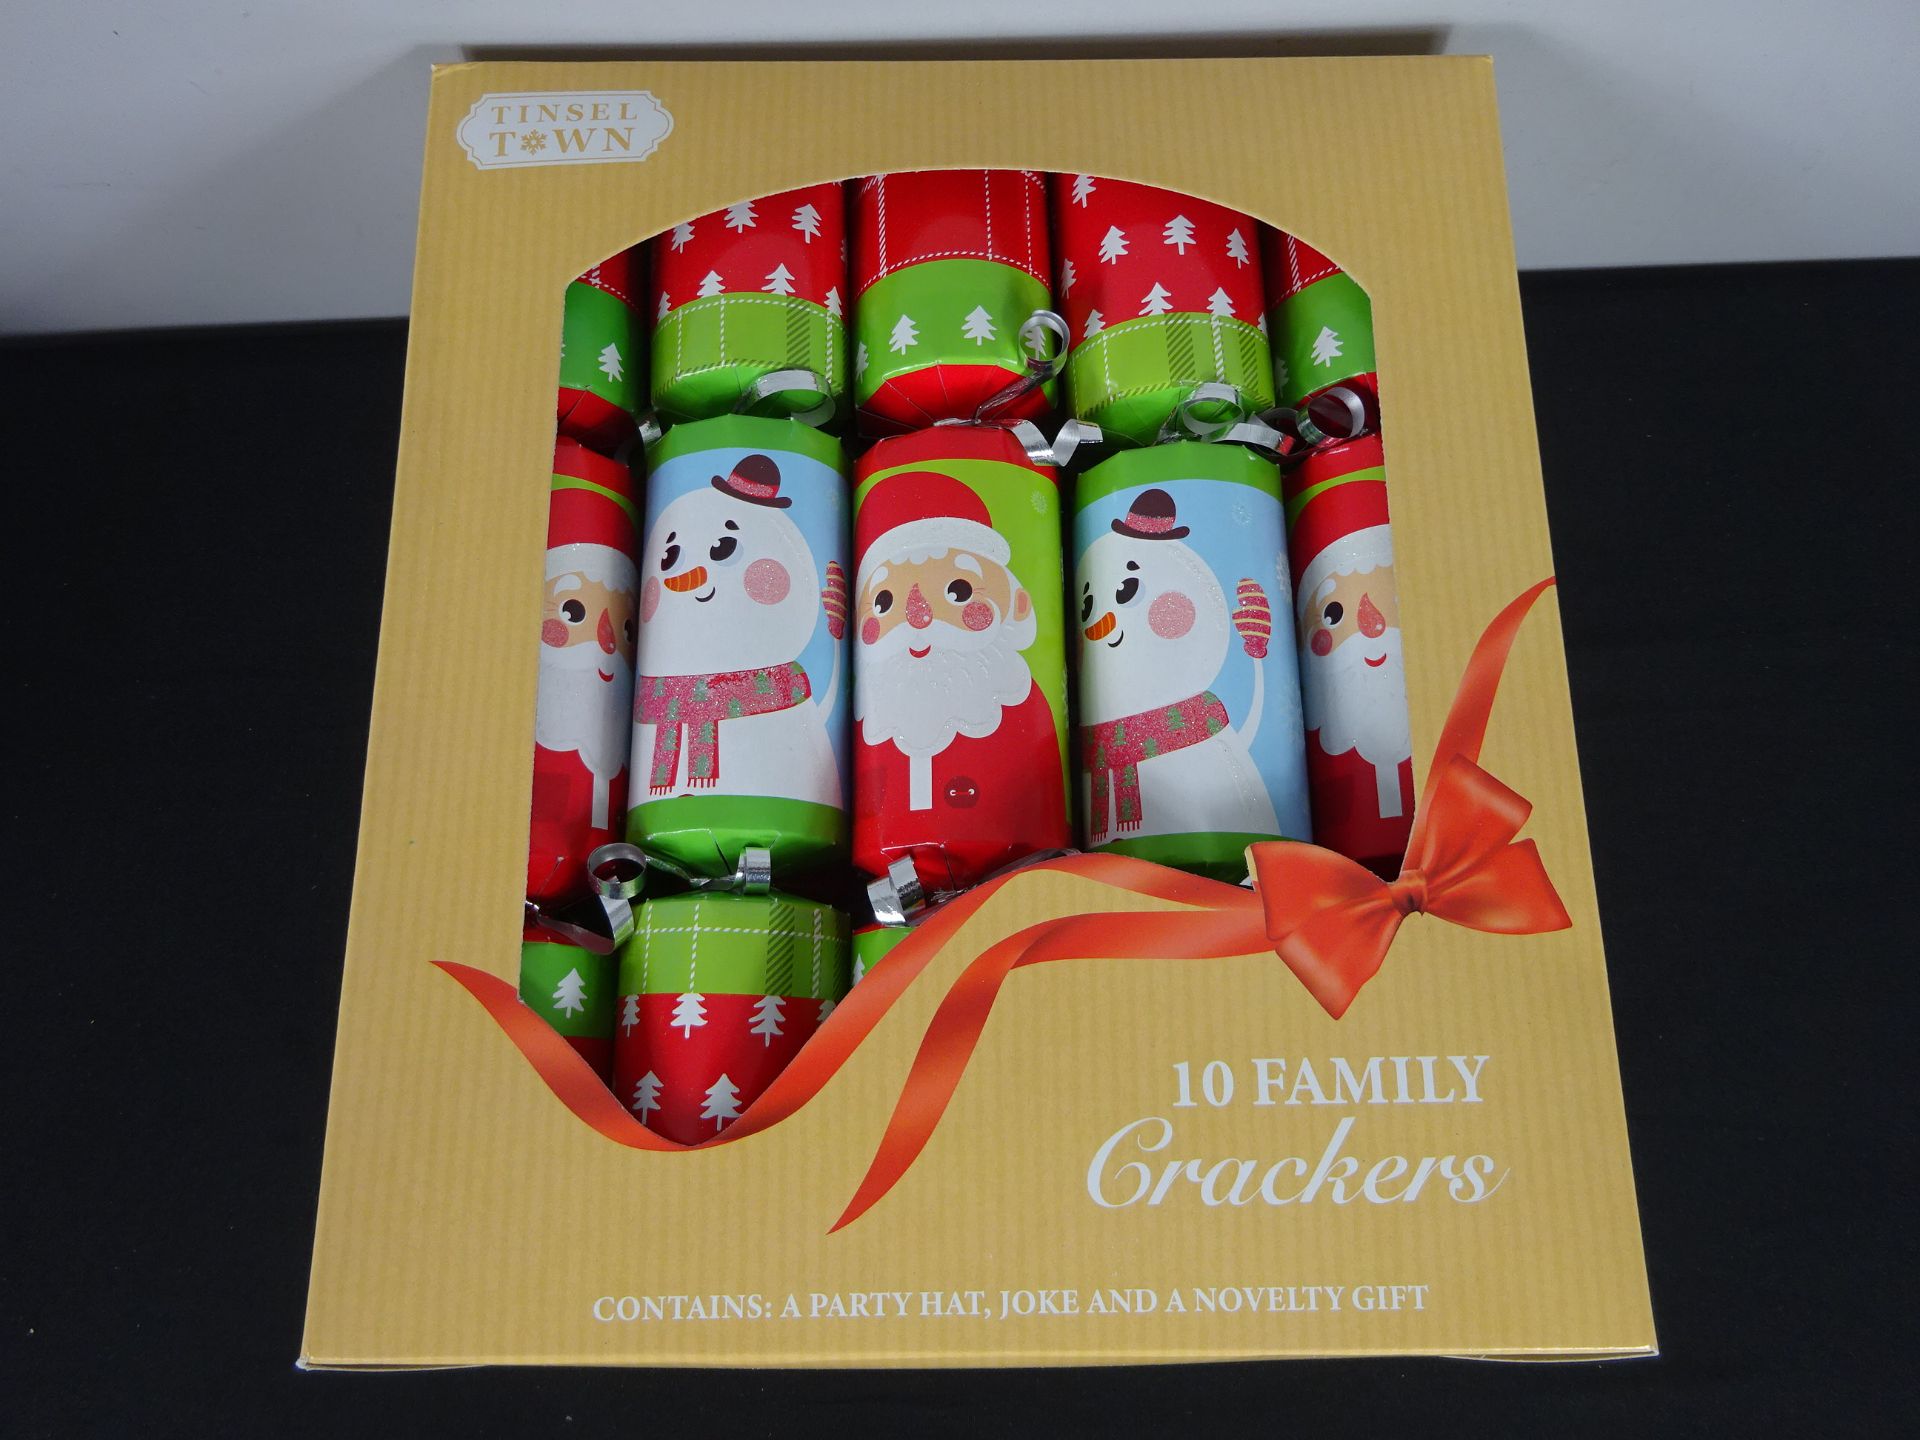 New 10 Patterned Family Crackers Contains A Party Hat, Joke & Novelty Gift